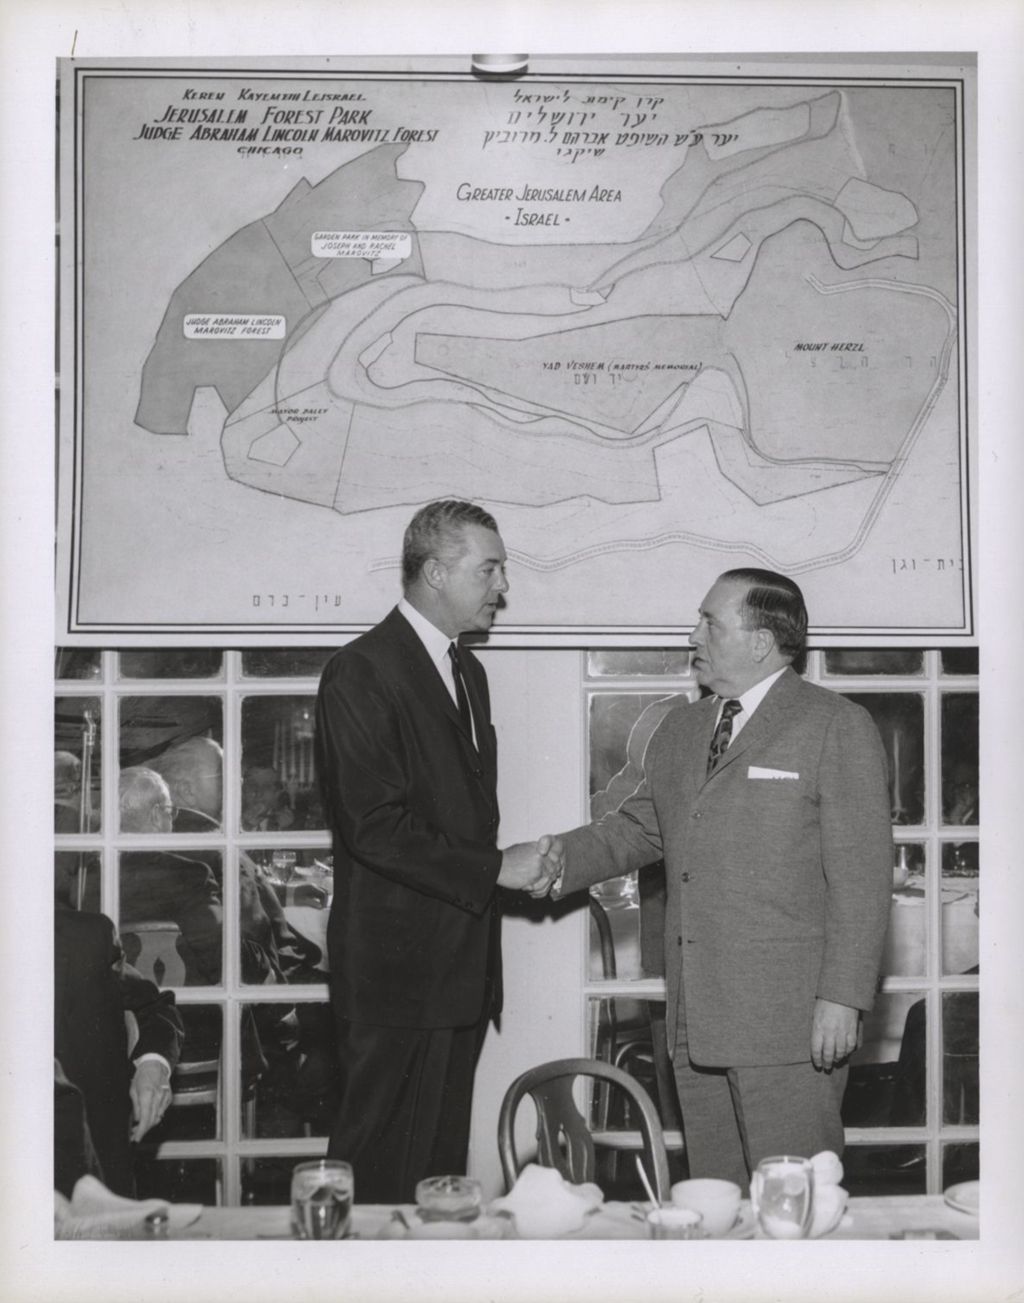 Richard J. Daley and a man with Jerusalem map showing Judge Marovitz Forest